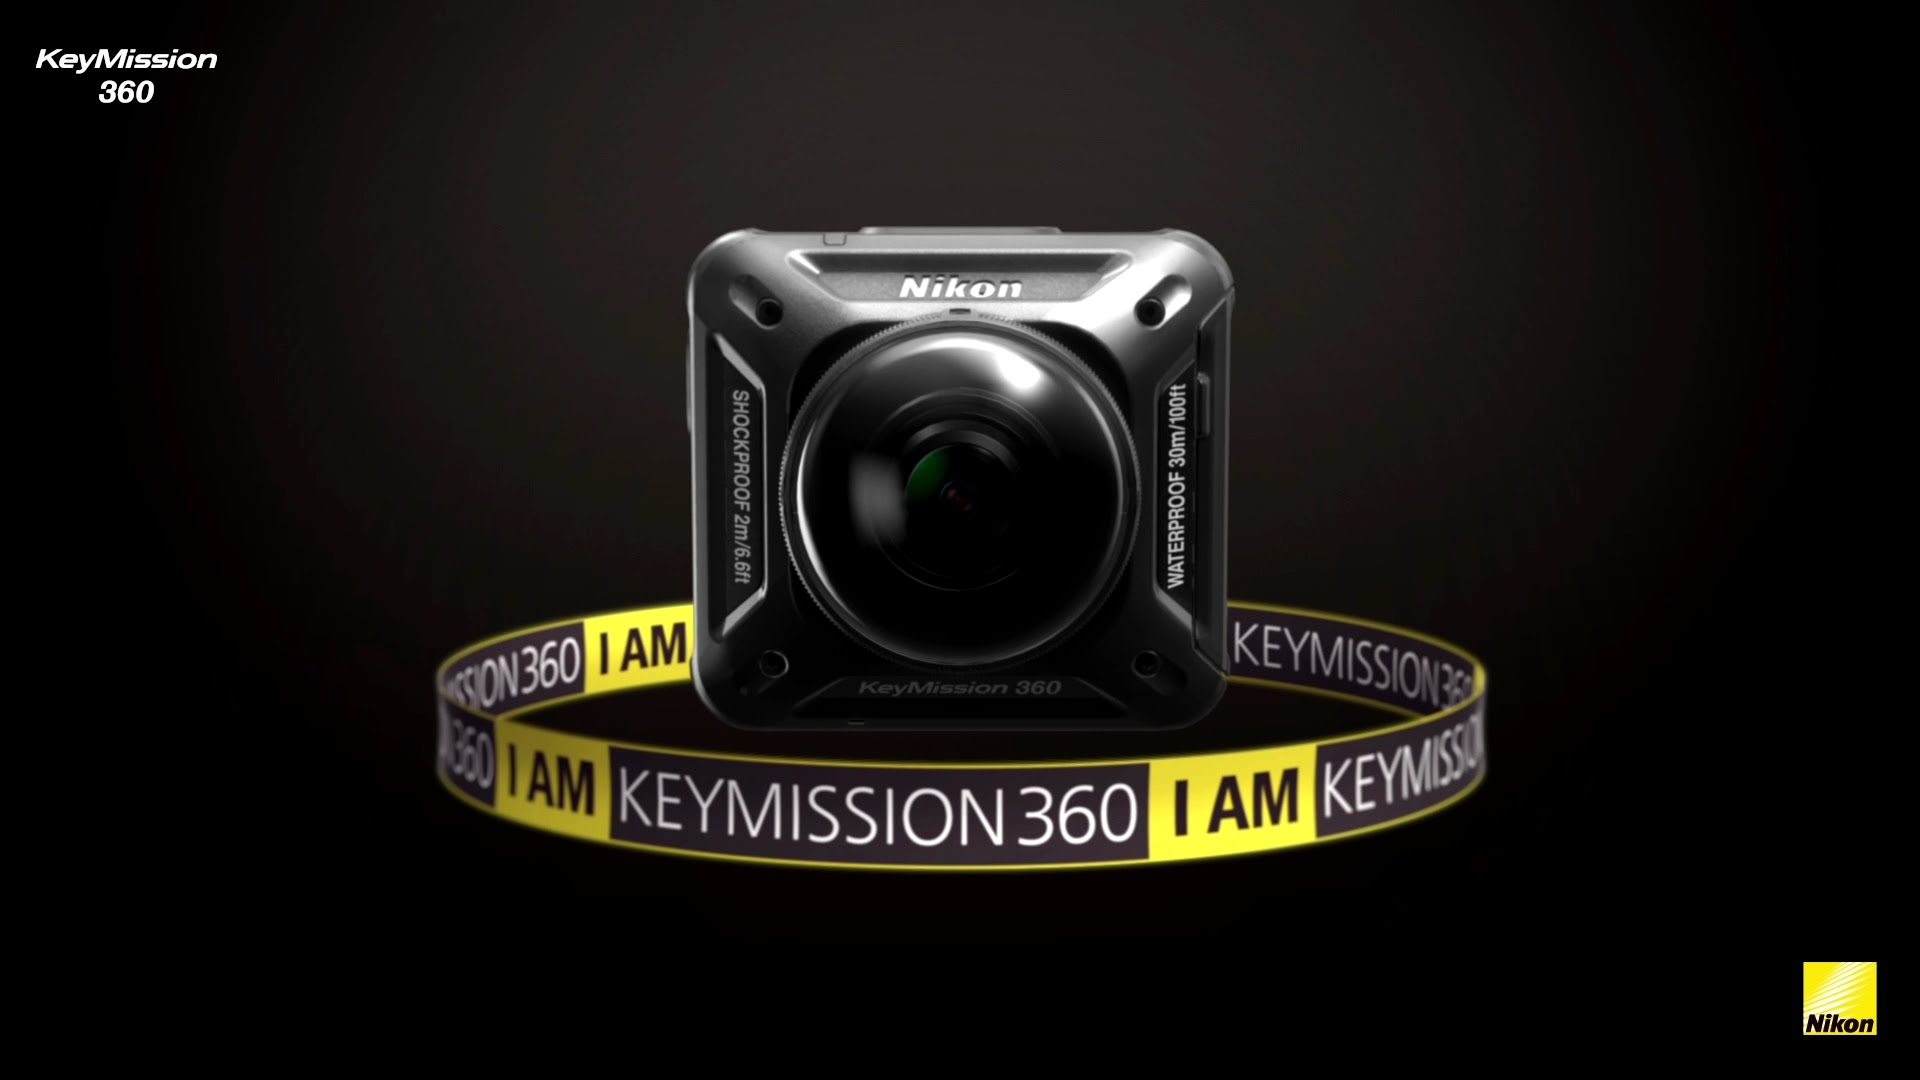 Nikon KeyMission 360, an all-new action camera